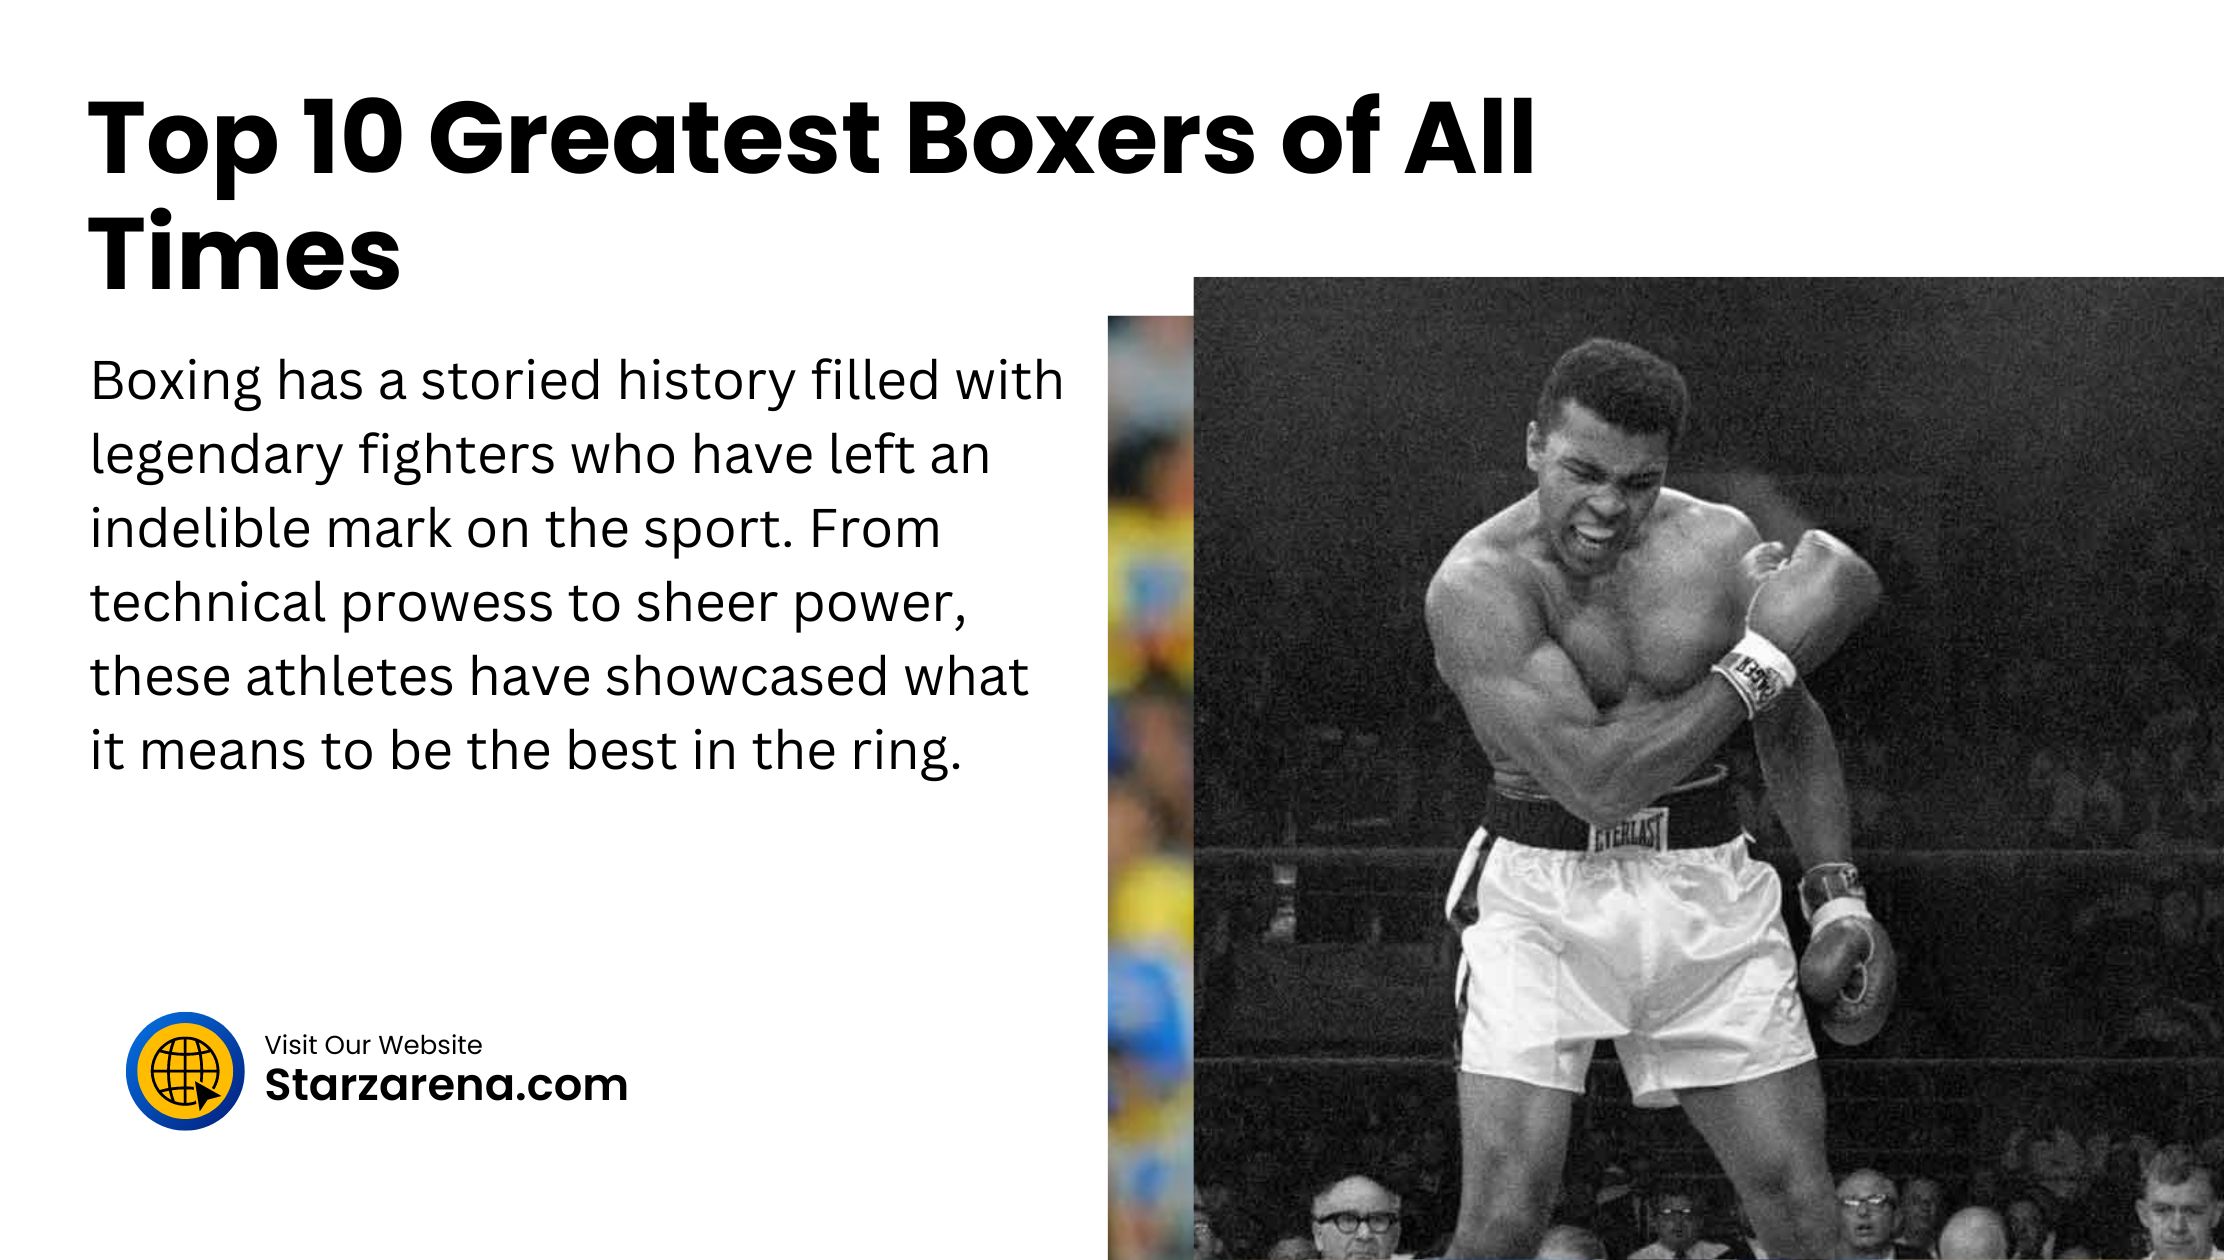 Top 10 Greatest Boxers of All Times